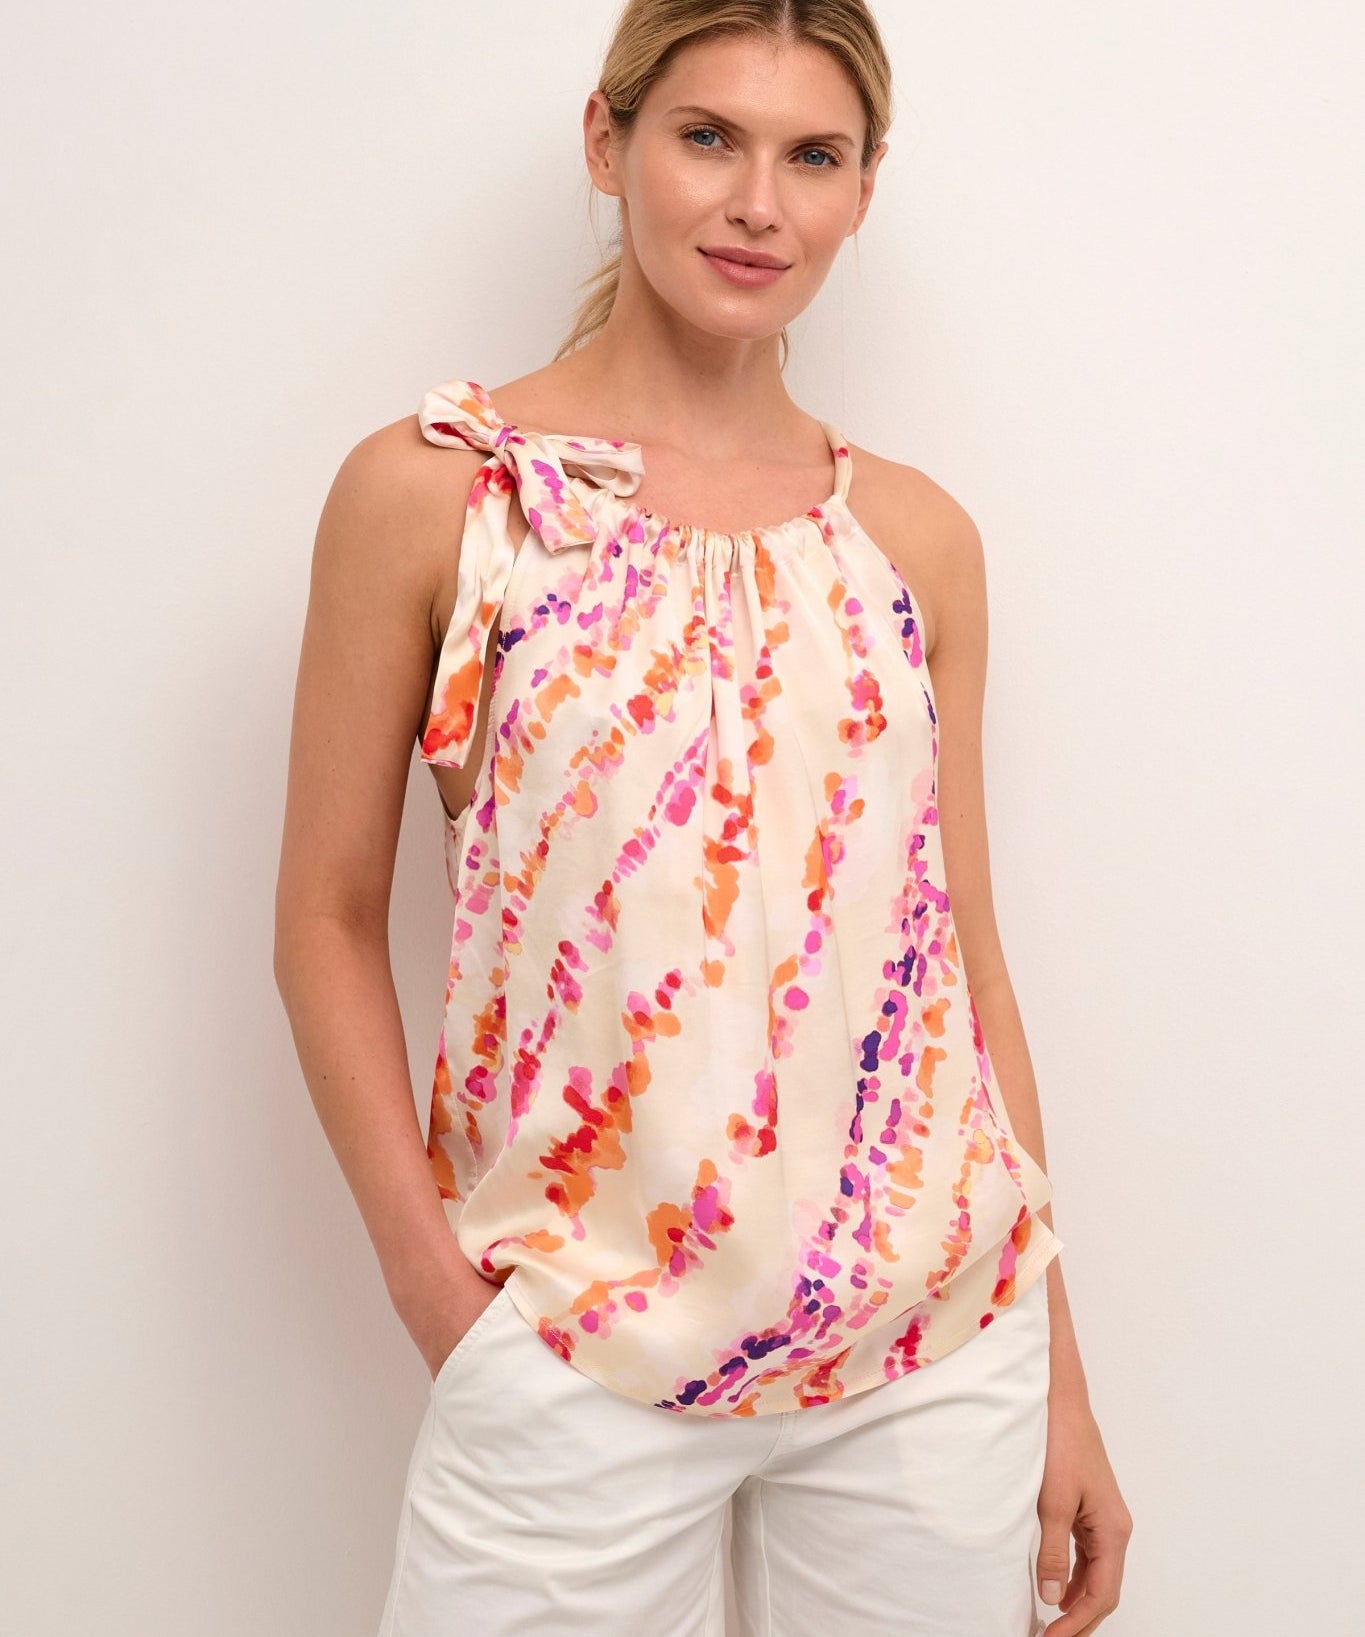 Barbara top by Culture - Blue Sky Fashions & Lingerie